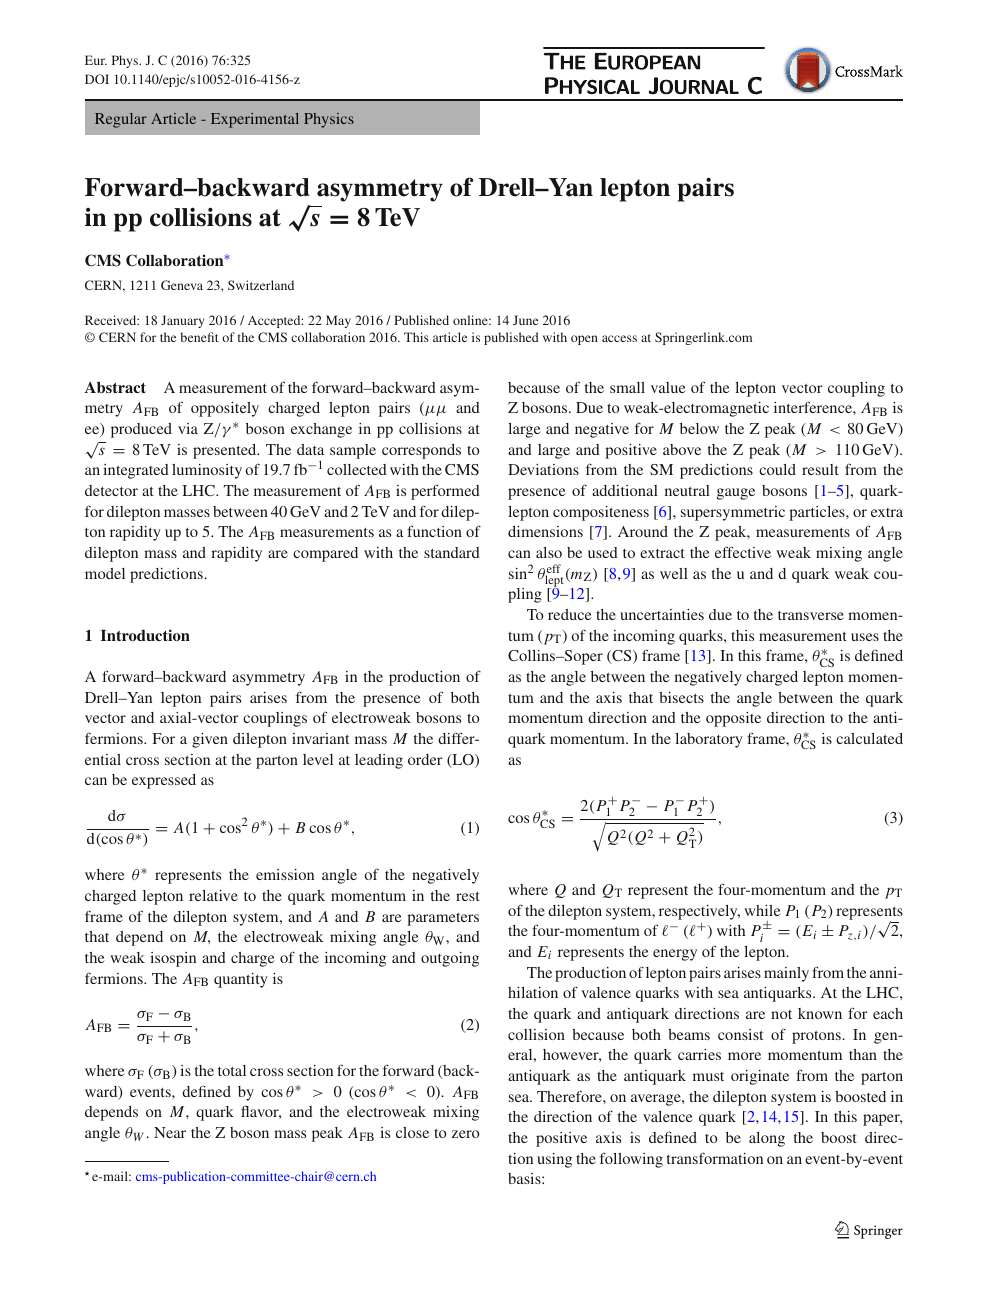 Forward–backward asymmetry of Drell–Yan lepton pairs in pp collisions at  $$\sqrt{s} = 8$$ s = 8 $$\,\mathrm{TeV}$$ TeV – topic of research paper in  Physical sciences. Download scholarly article PDF and read